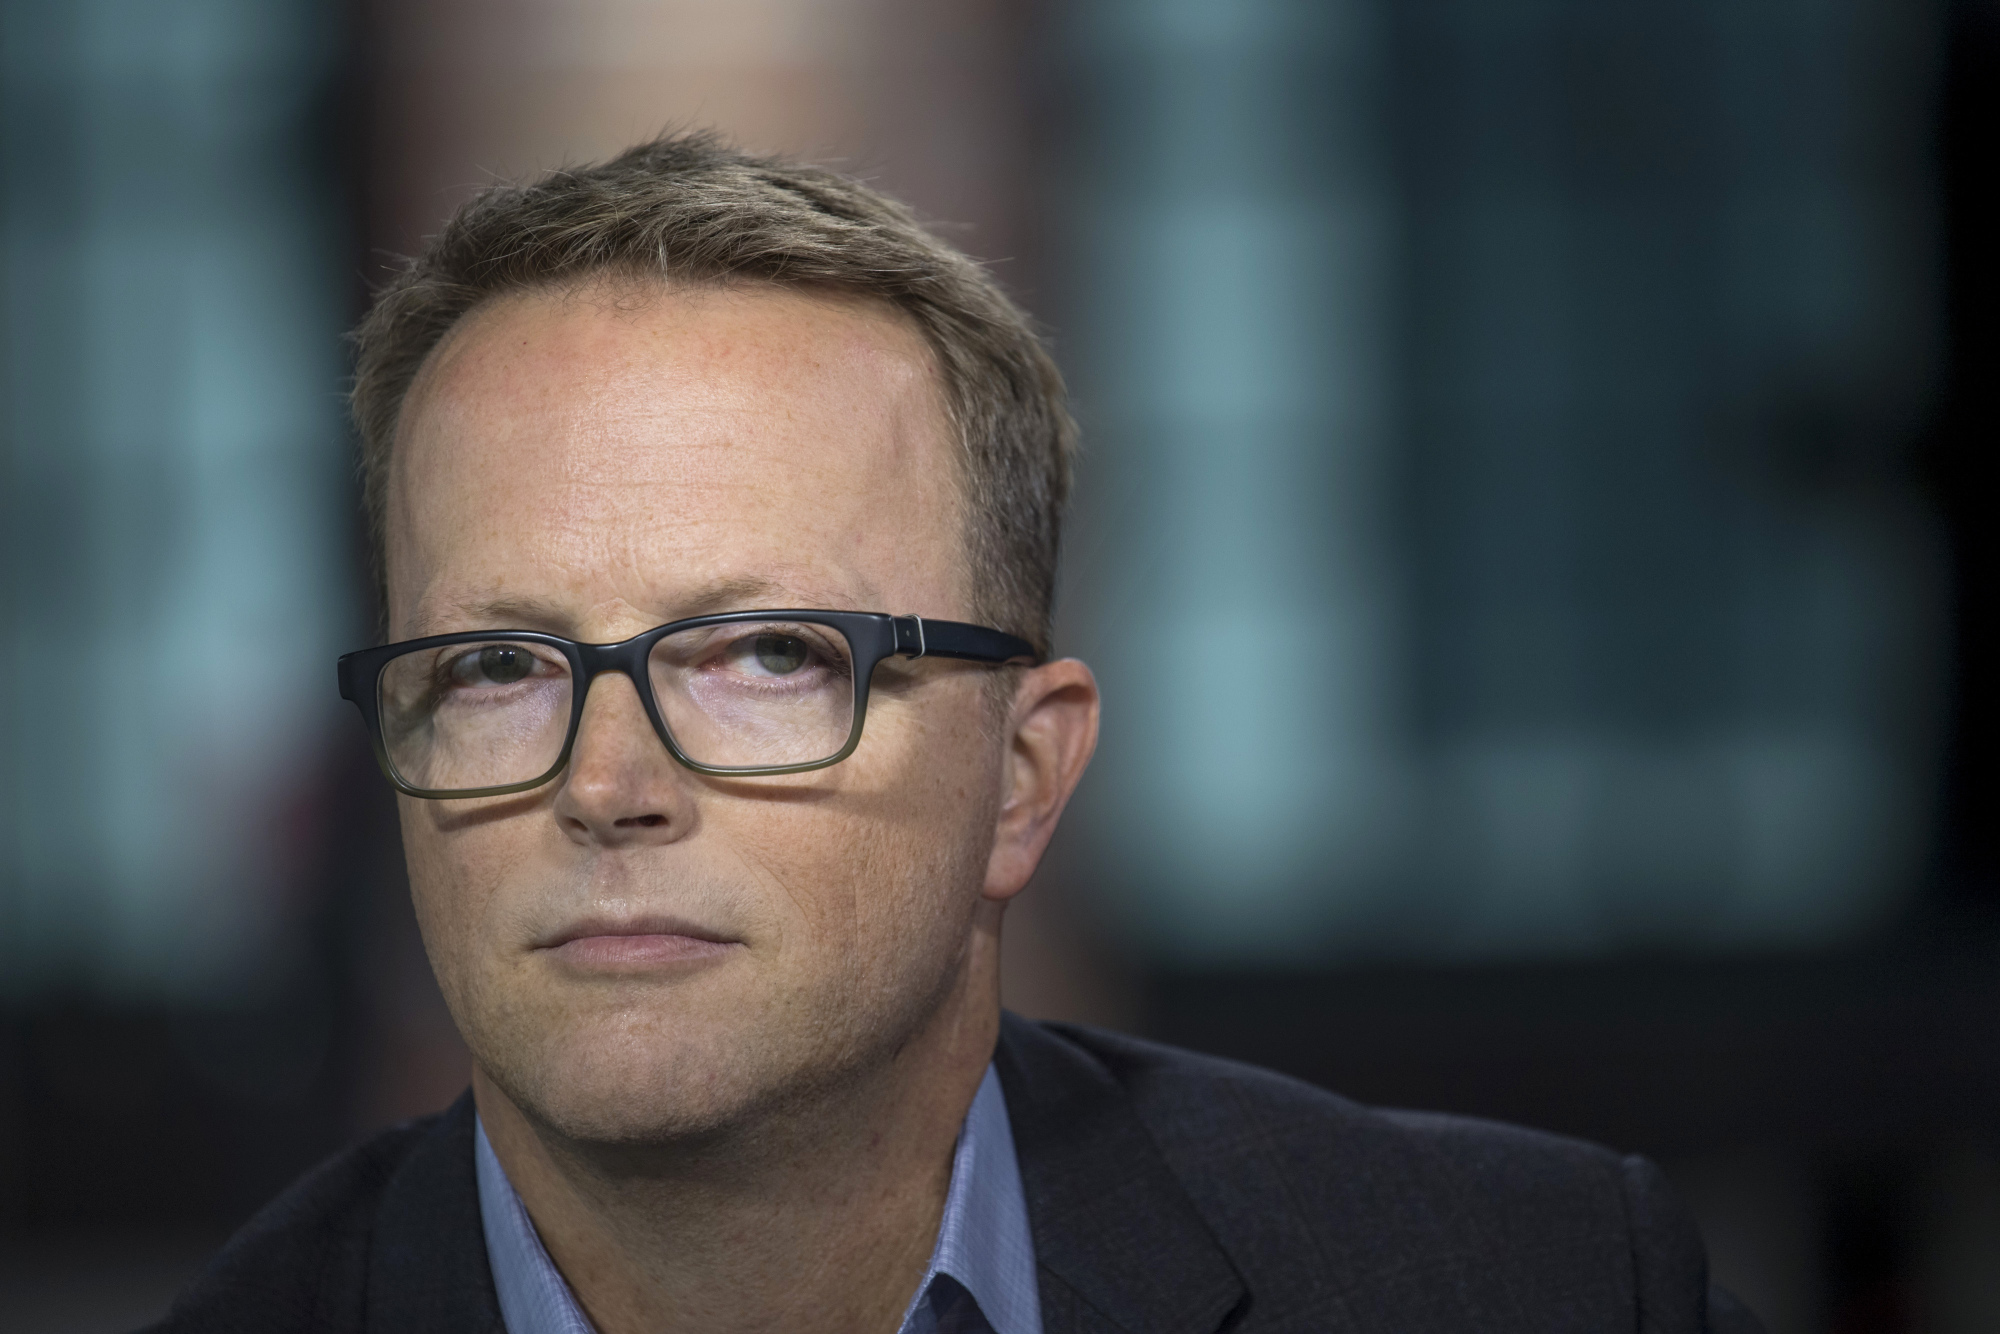 Scott Sanborn, chief executive officer of Lending Club Corp., listens to a question during a Bloomberg Technology interview in San Francisco, California, U.S., on Tuesday, Aug. 8, 2017. Sanborn discussed the company's path to recovery and bringing investors back to the platform. Photographer: David Paul Morris/Bloomberg